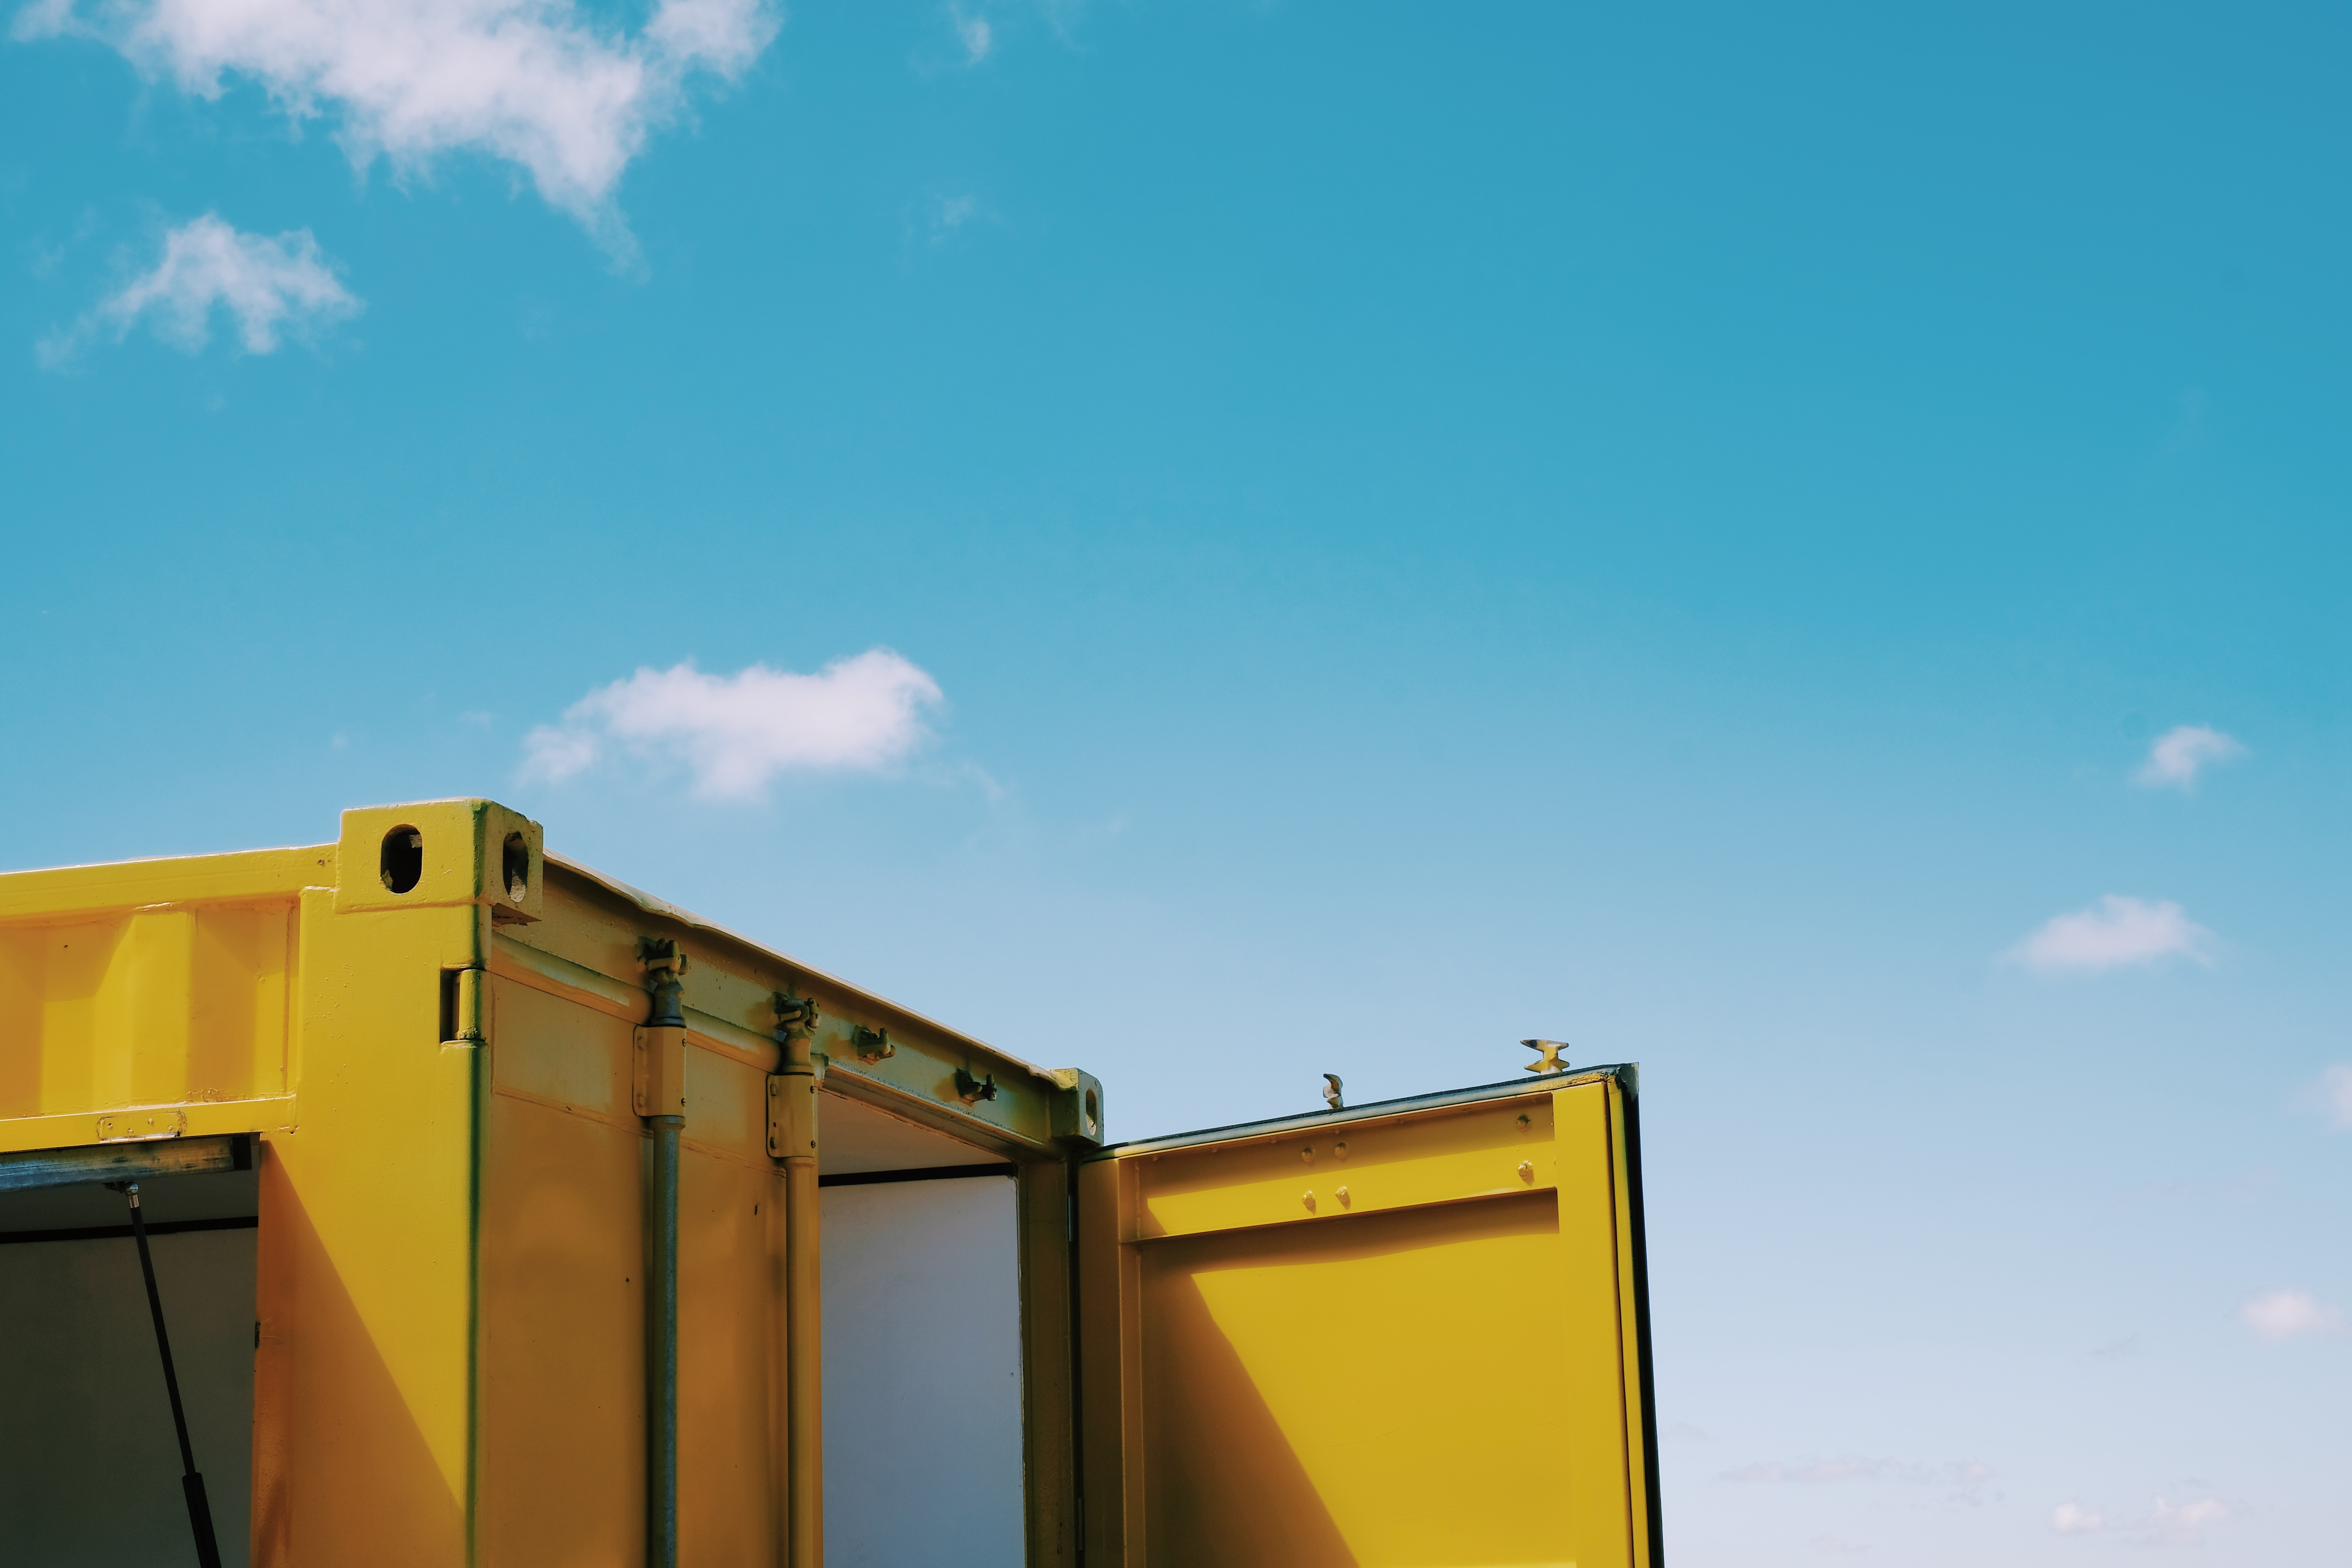 A single yellow shipping container up close,
with the door open,
but we can't see in
